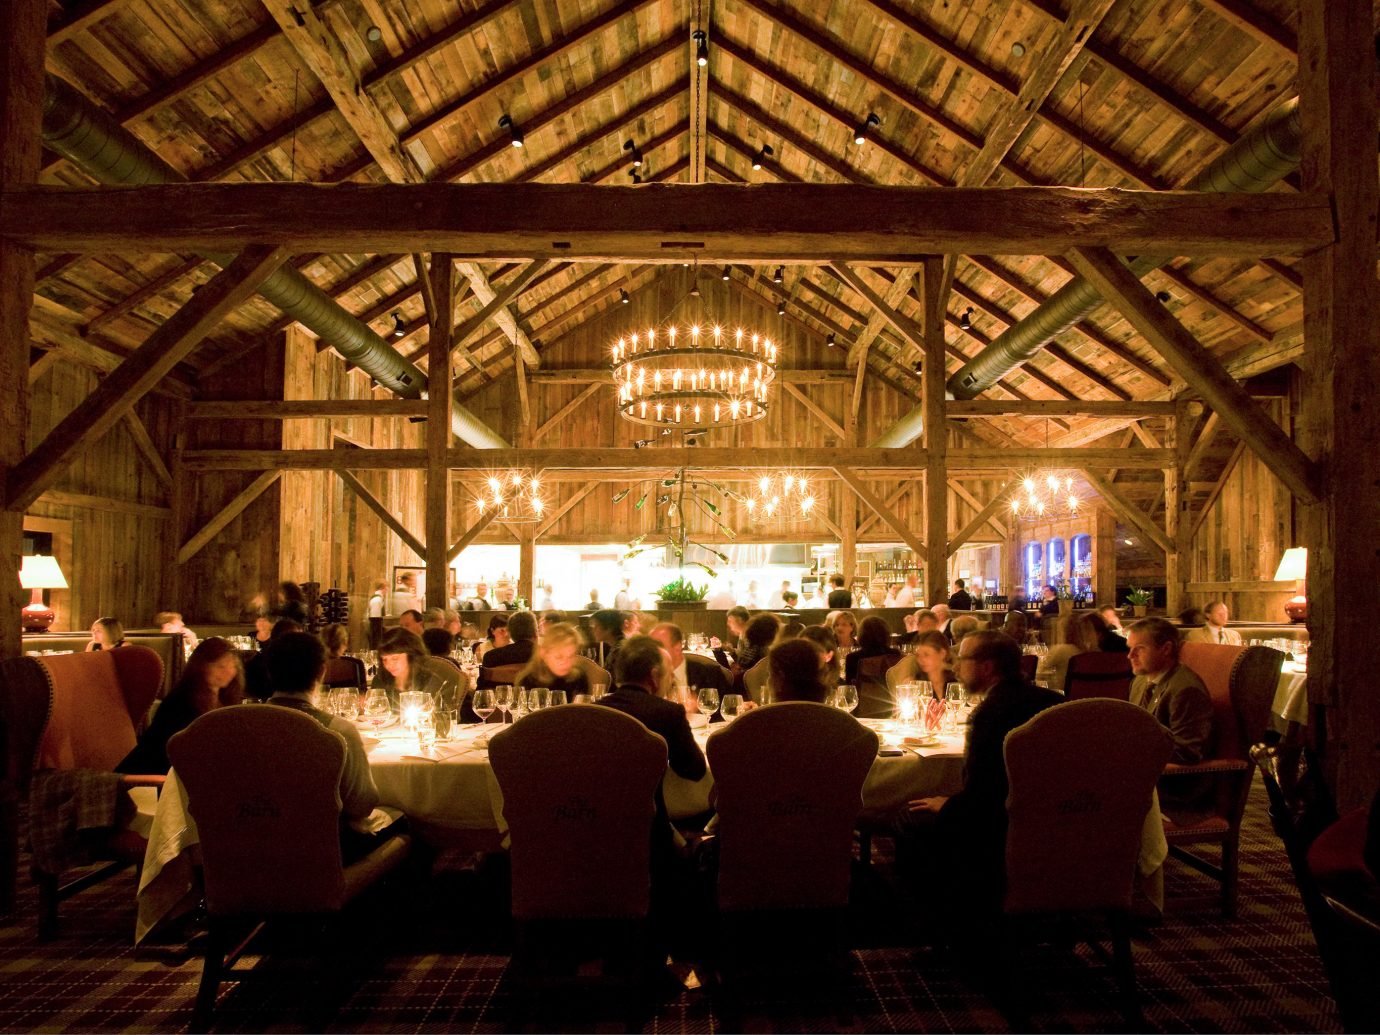 All-Inclusive Resorts Dining Drink Eat Elegant Glamping Hotels Romance Rustic Sport indoor person people ceiling group ceremony